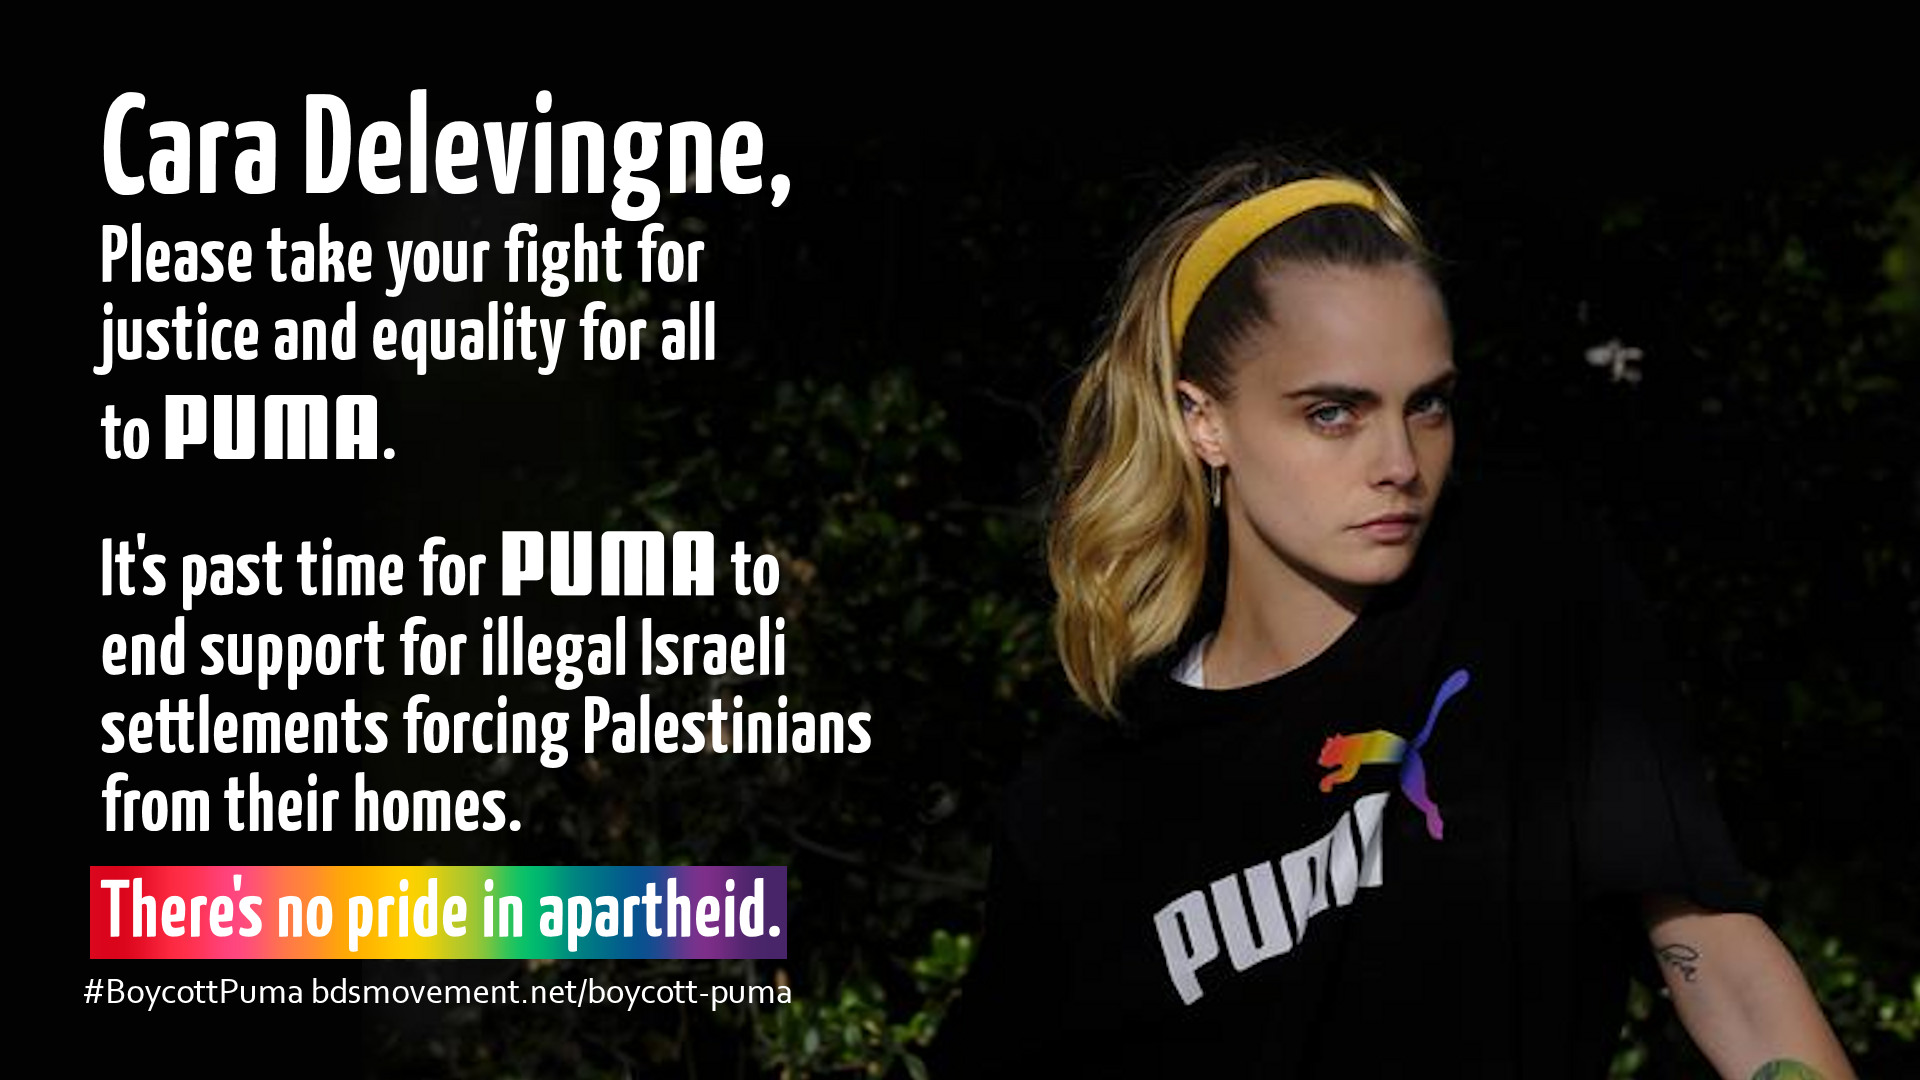 Urge Cara Delevingne to take her stand for justice to Puma